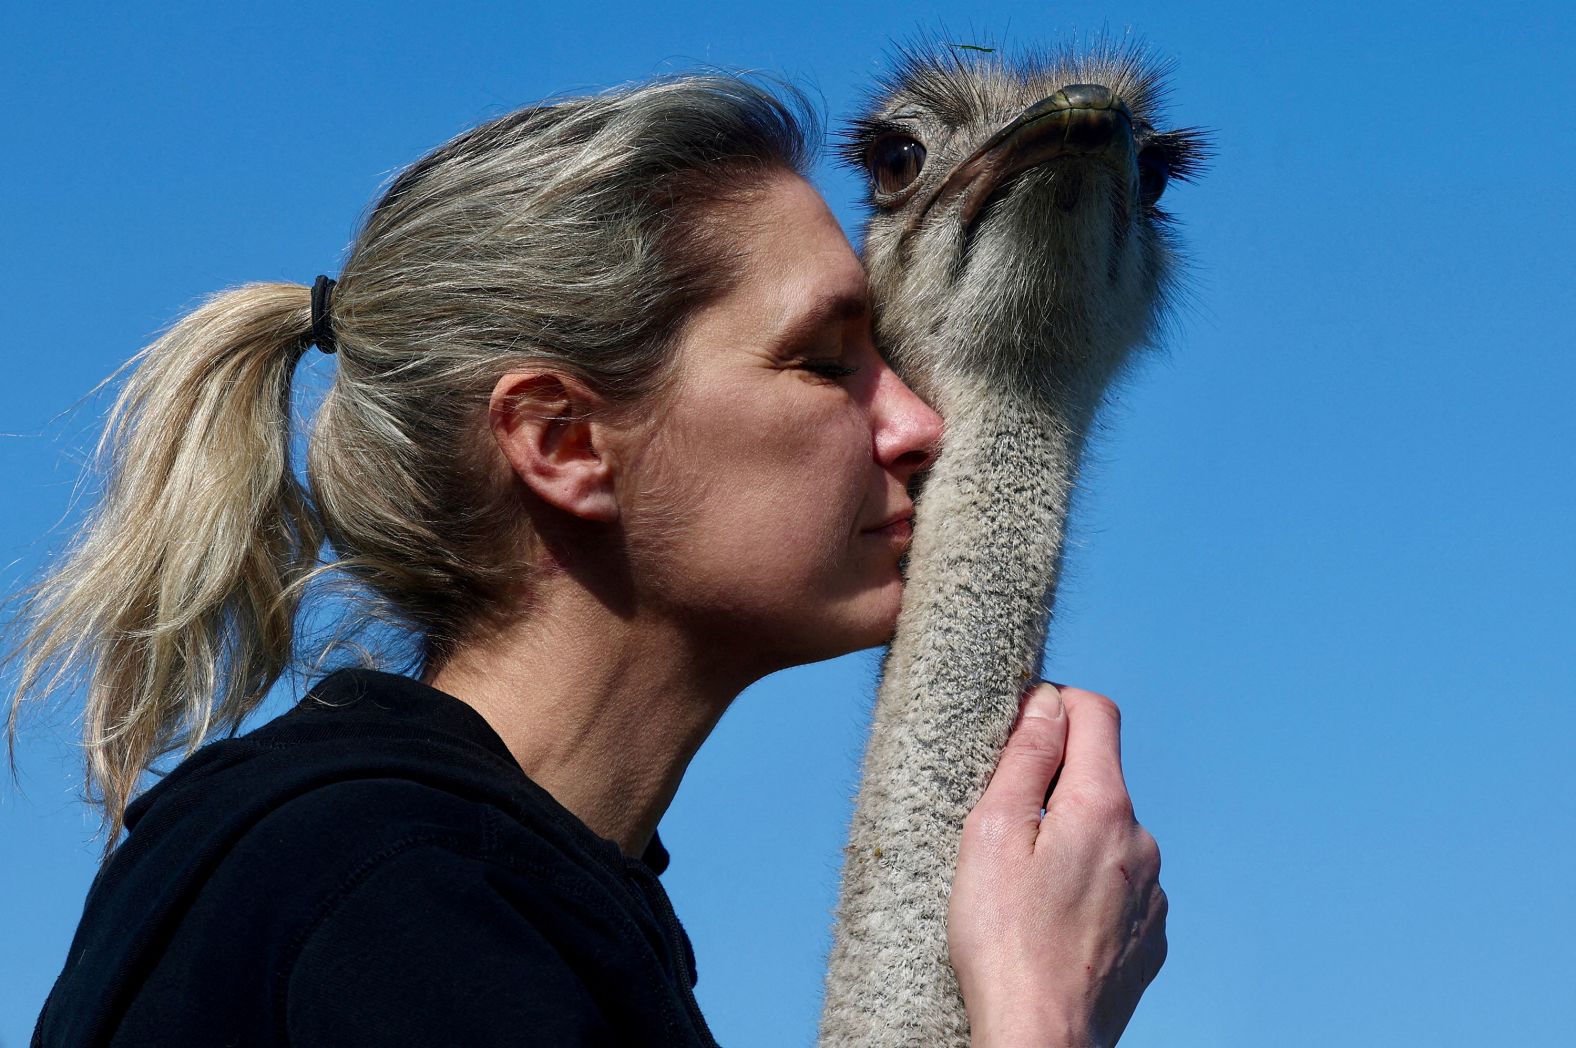 Wendy Adriaens, founder of the animal rescue farm De Passiehoeve, hugs Blue, a 6-year-old female ostrich, at the farm in Kalmthout, Belgium, on Friday, March 8.